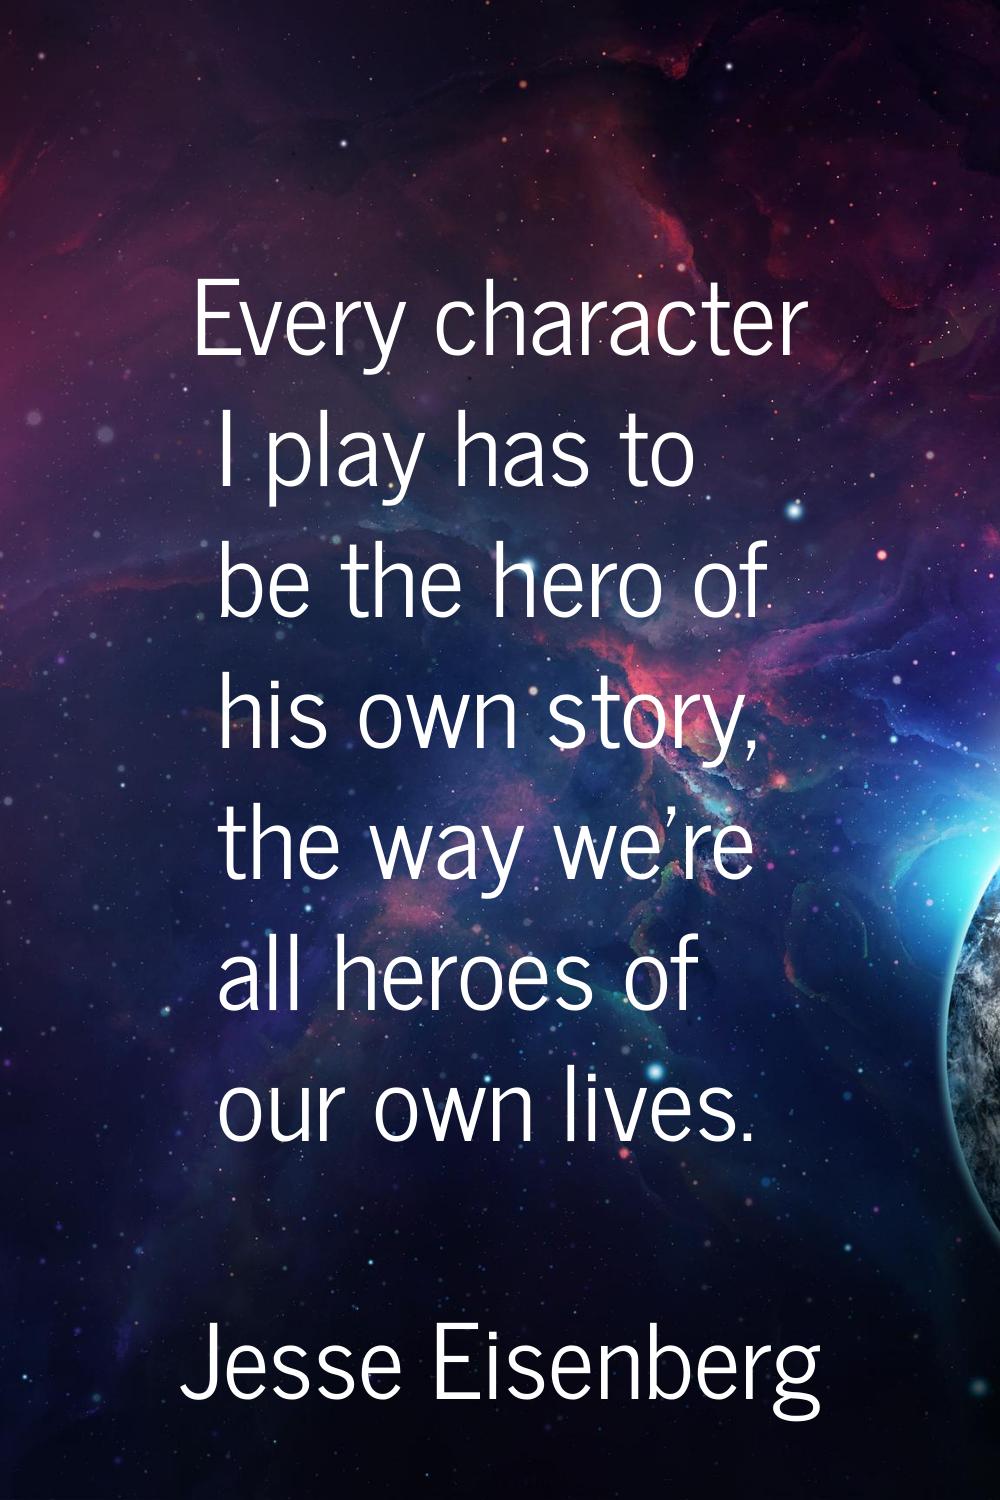 Every character I play has to be the hero of his own story, the way we're all heroes of our own liv